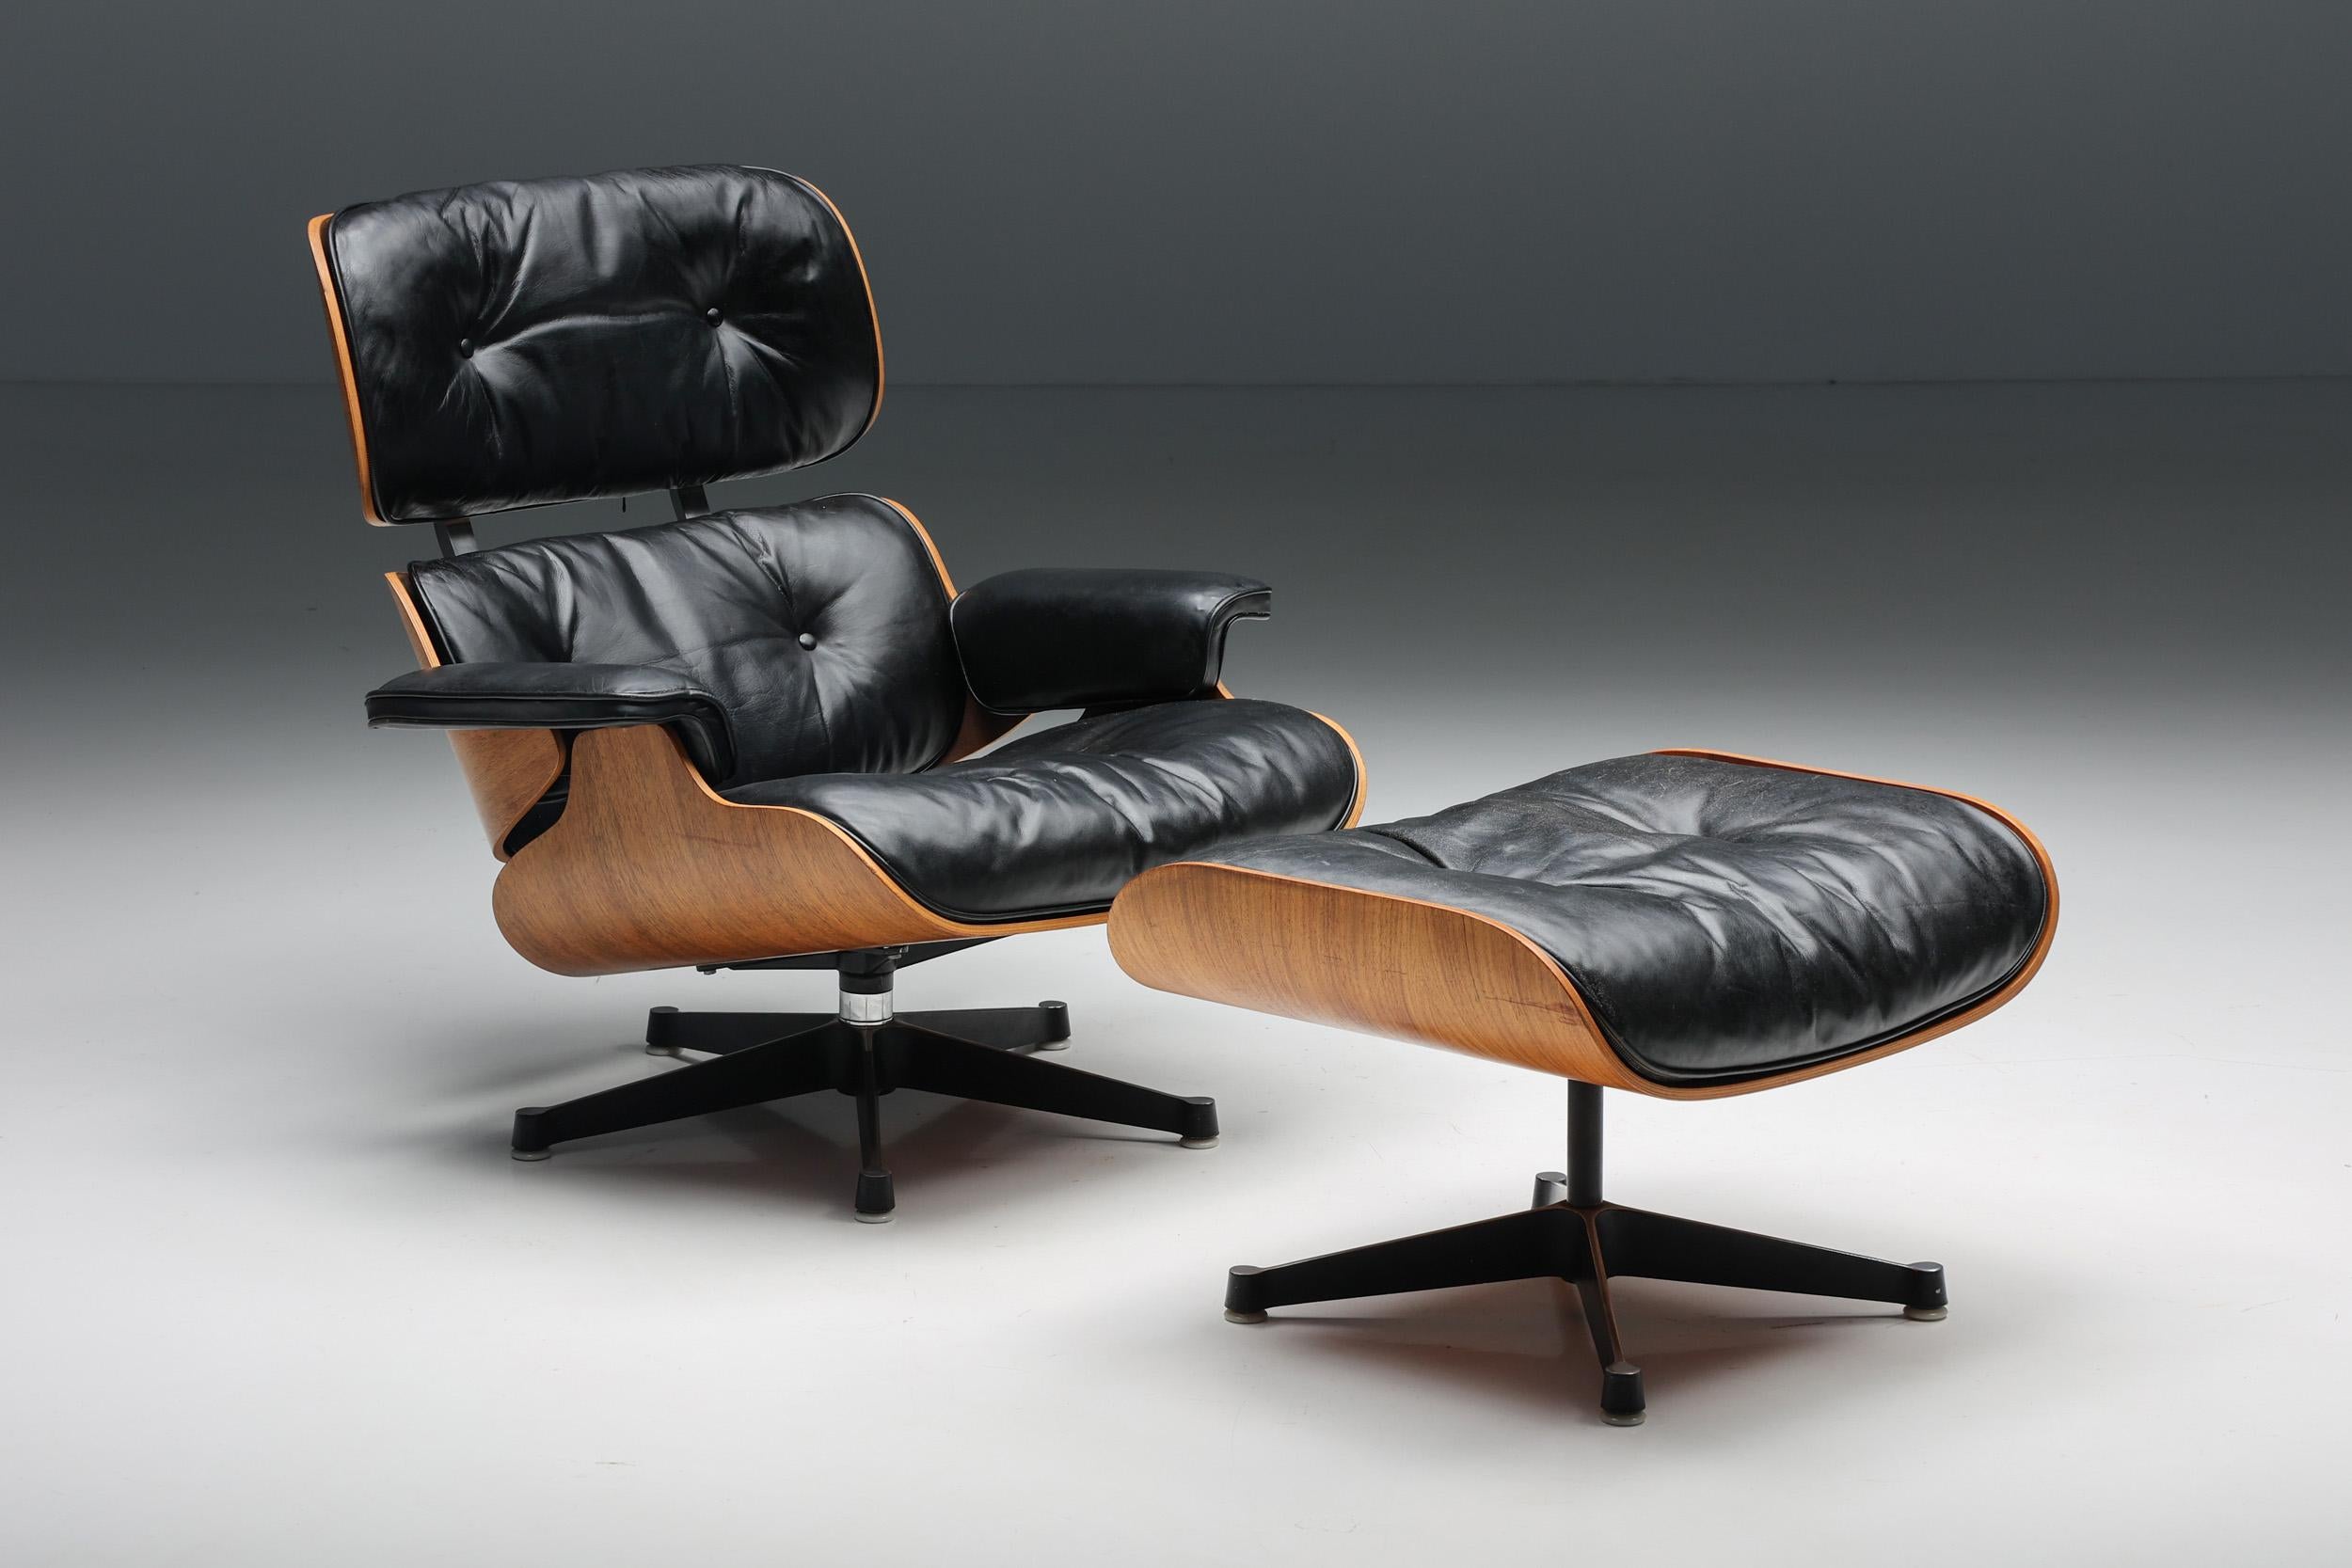 Eames; Herman Miller; Charles & Ray Eames; Mid-Century Modern, Lounge Chair; Ottoman; Iconic Design; Historical Furniture; Collector's Item; Design Classic; Herman Miller Collection; 1957; Models 670 & 671;

Eames lounge chair & ottoman, models